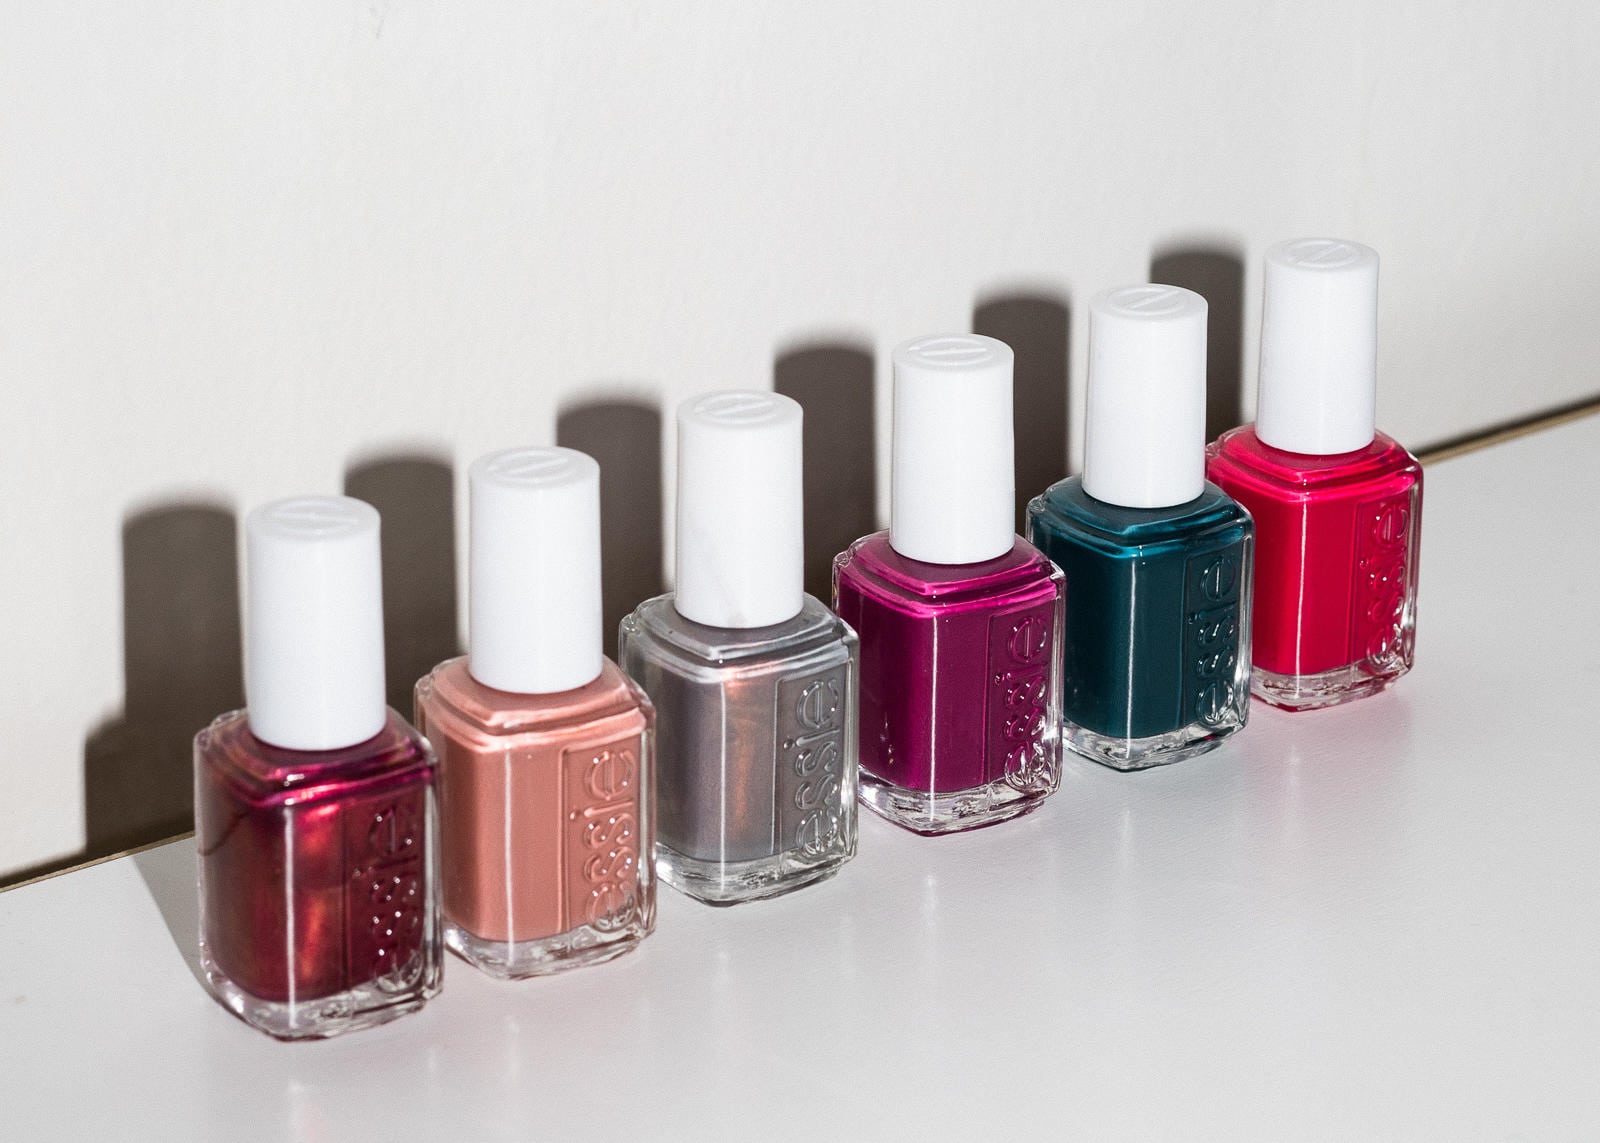 Essie Winter Nail Polish Collection - The Girl From Panama.